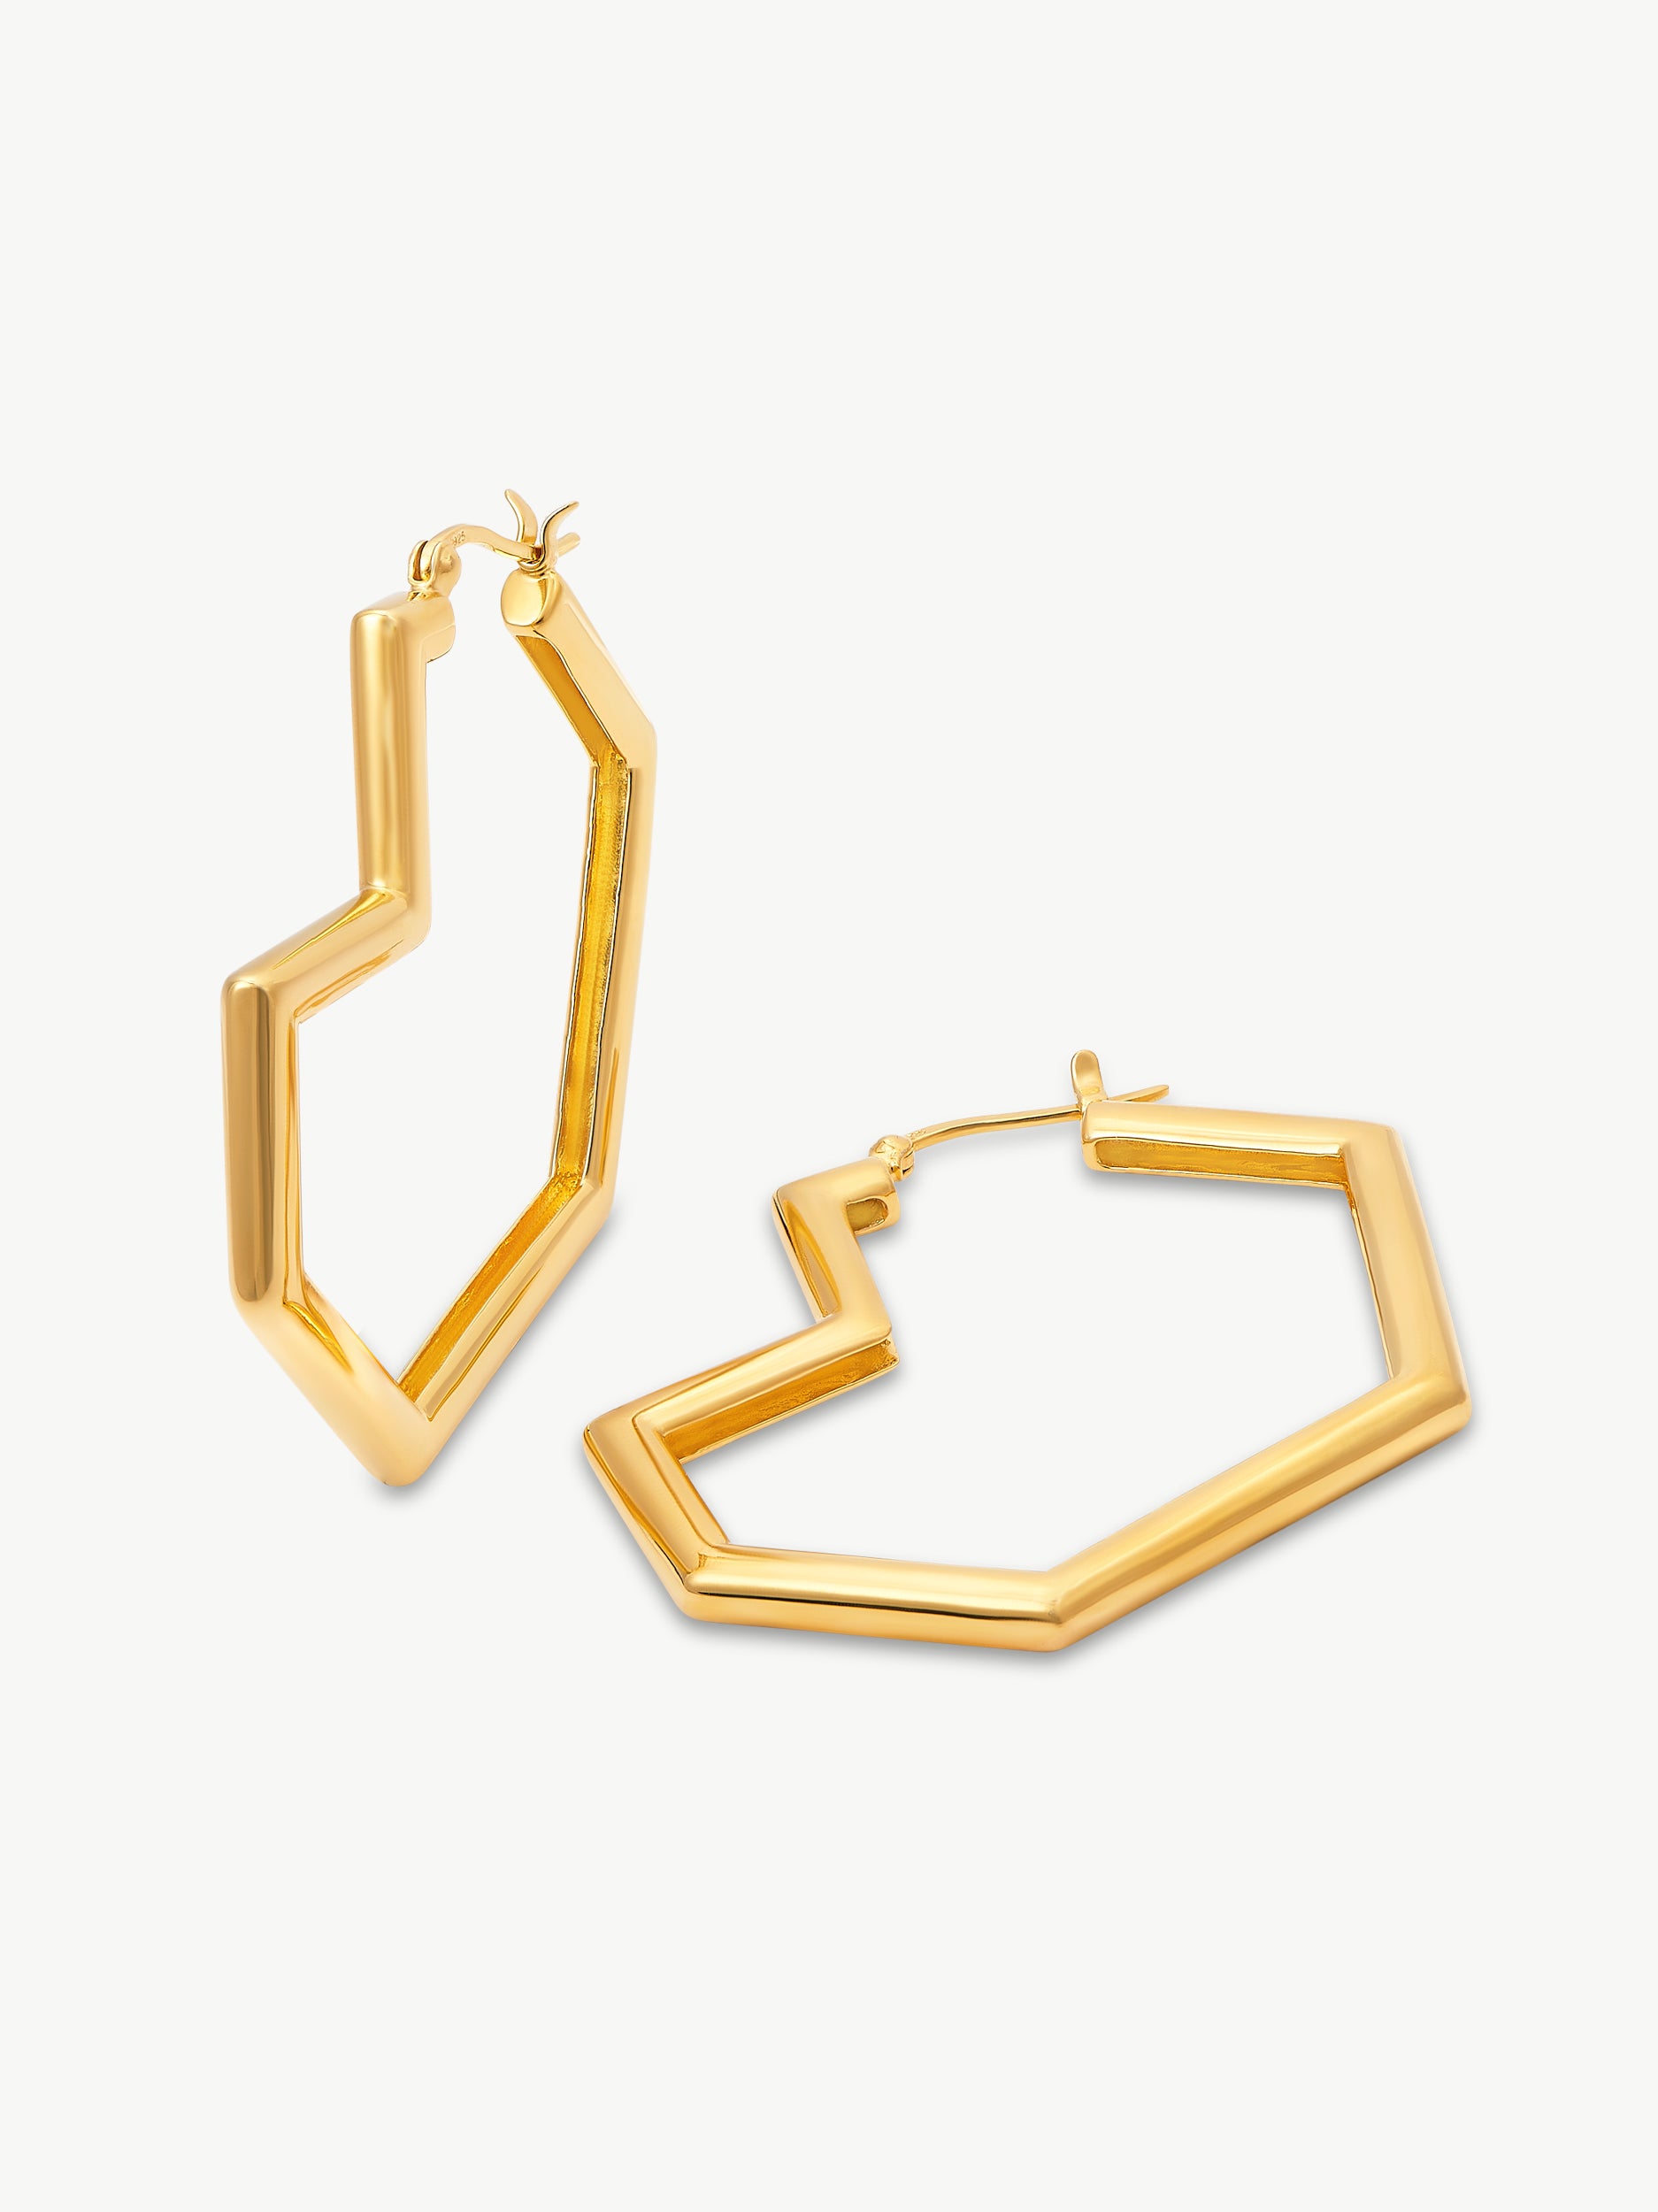 DARYL LARGE HOOPS <br> 18k Gold Plated